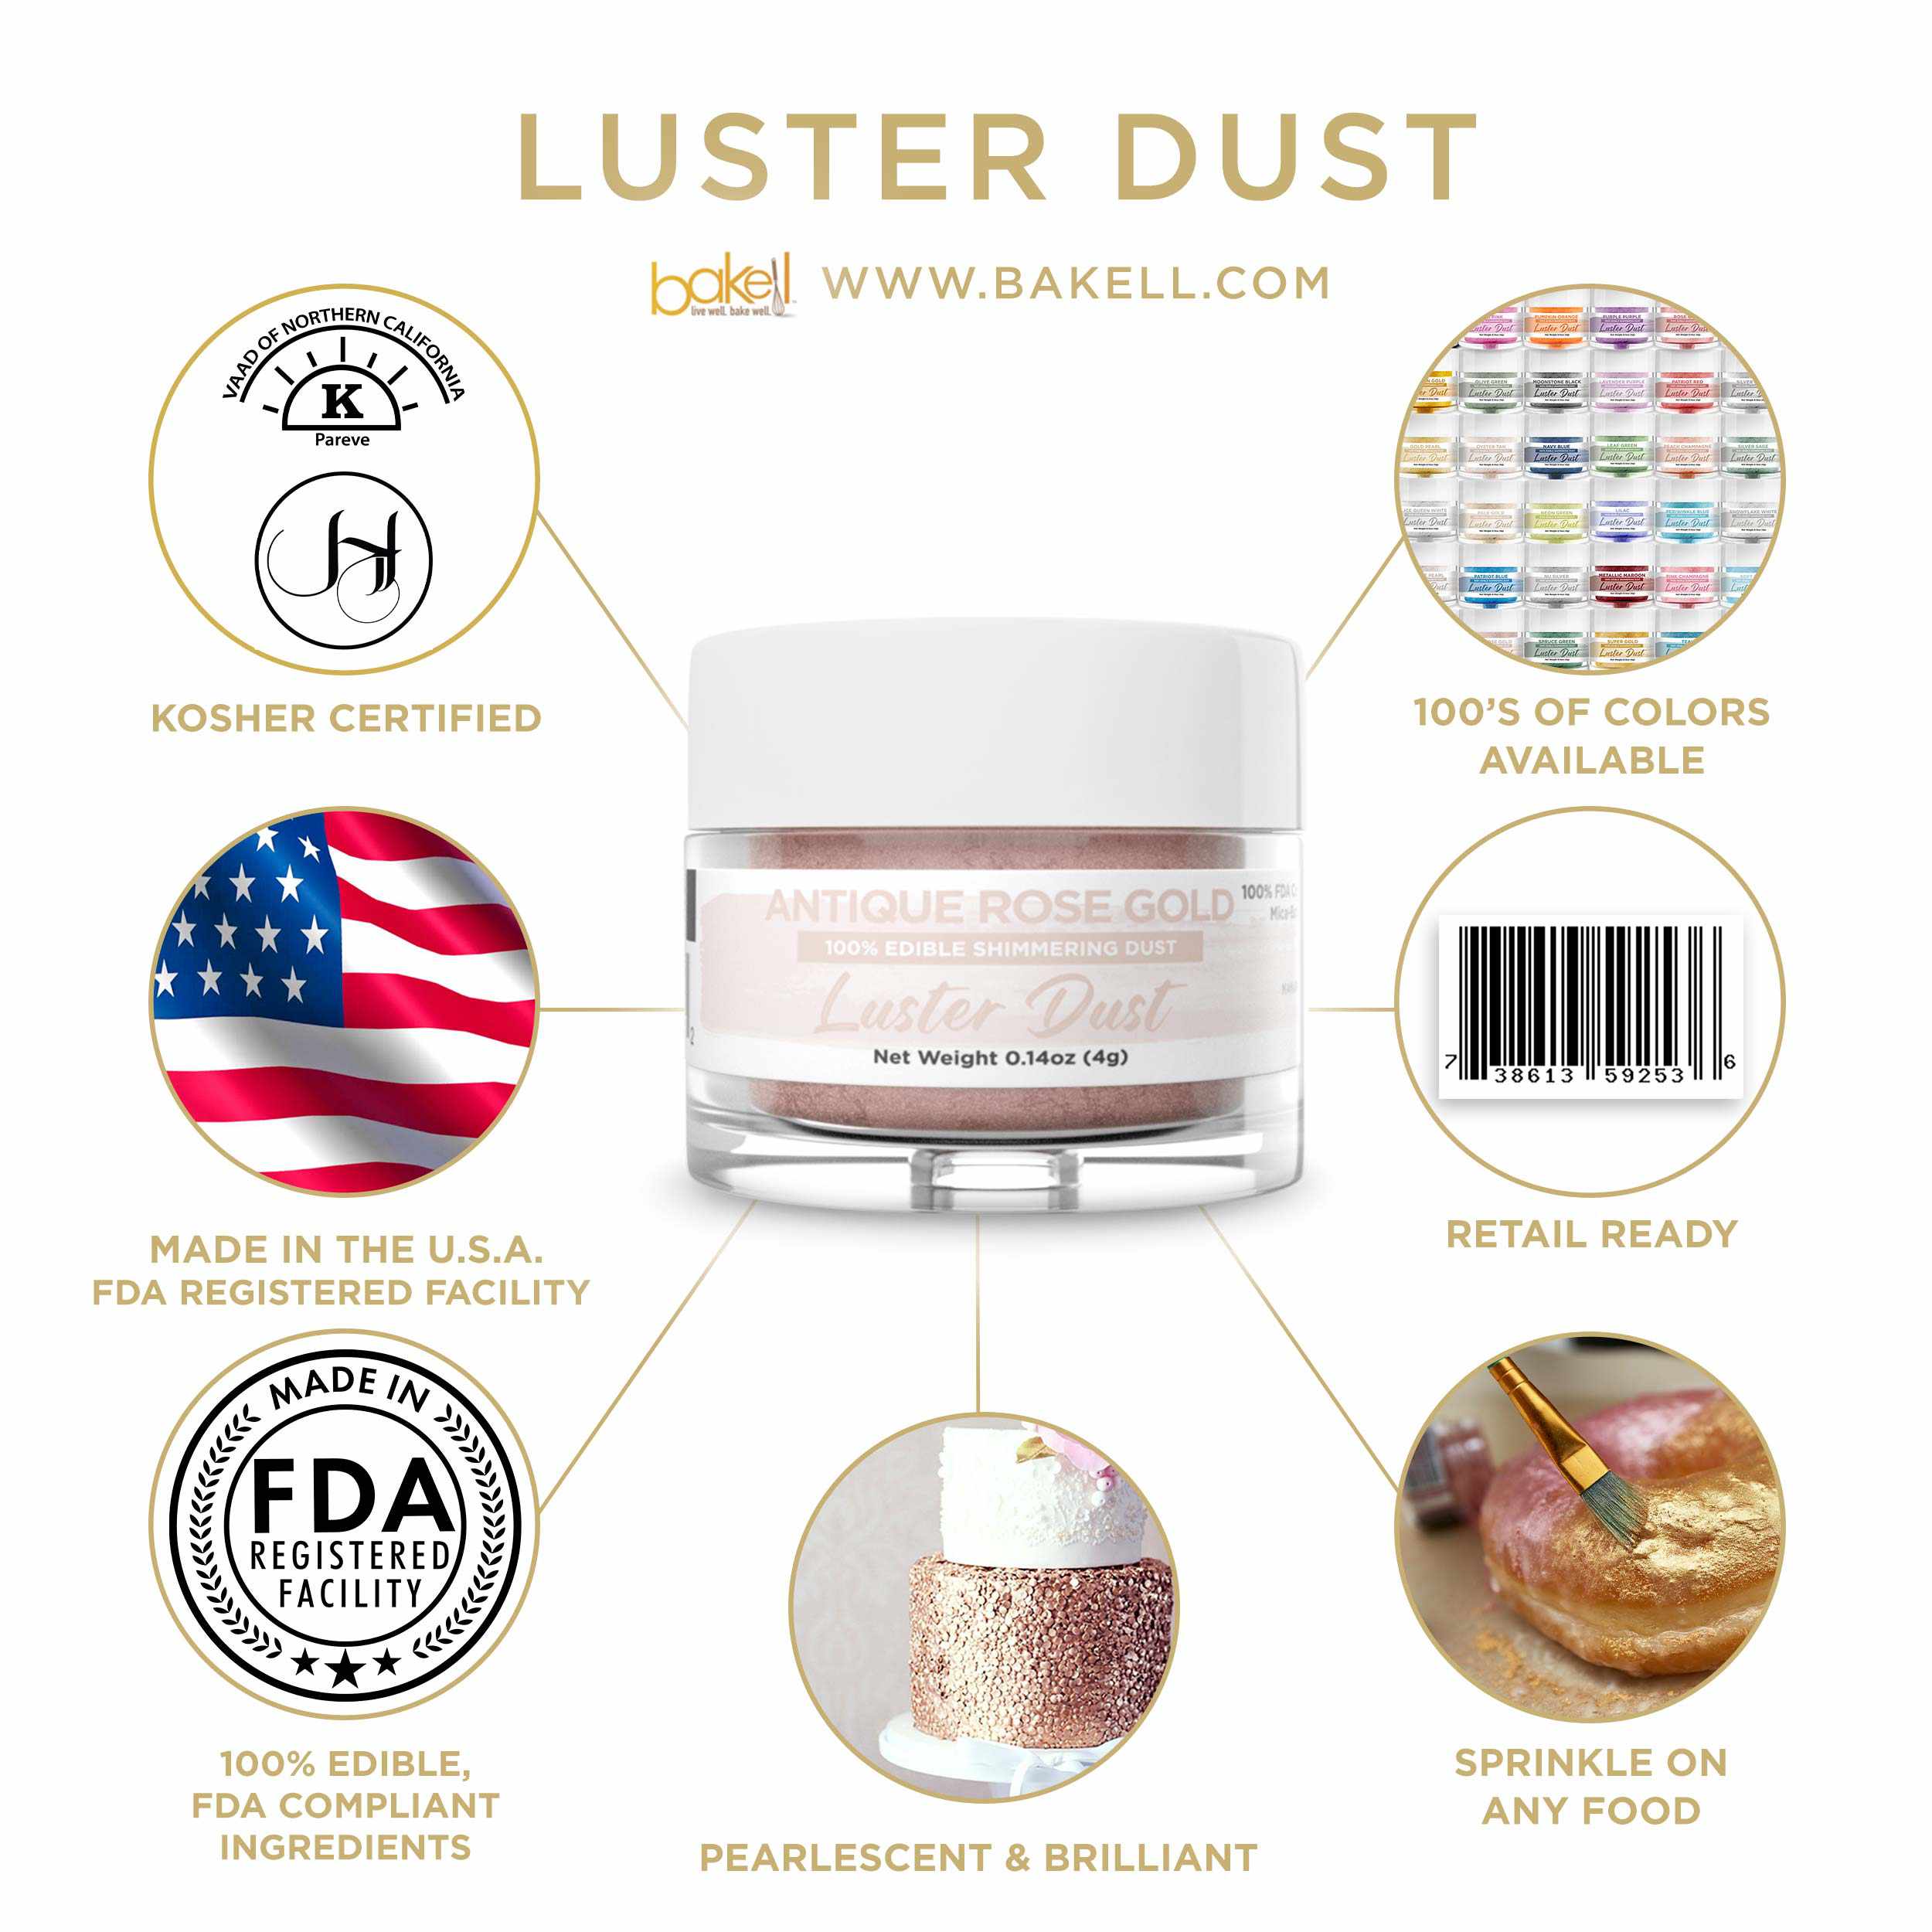 Infographic with detail about the Luster Dust Rose Gold product. | bakell.com